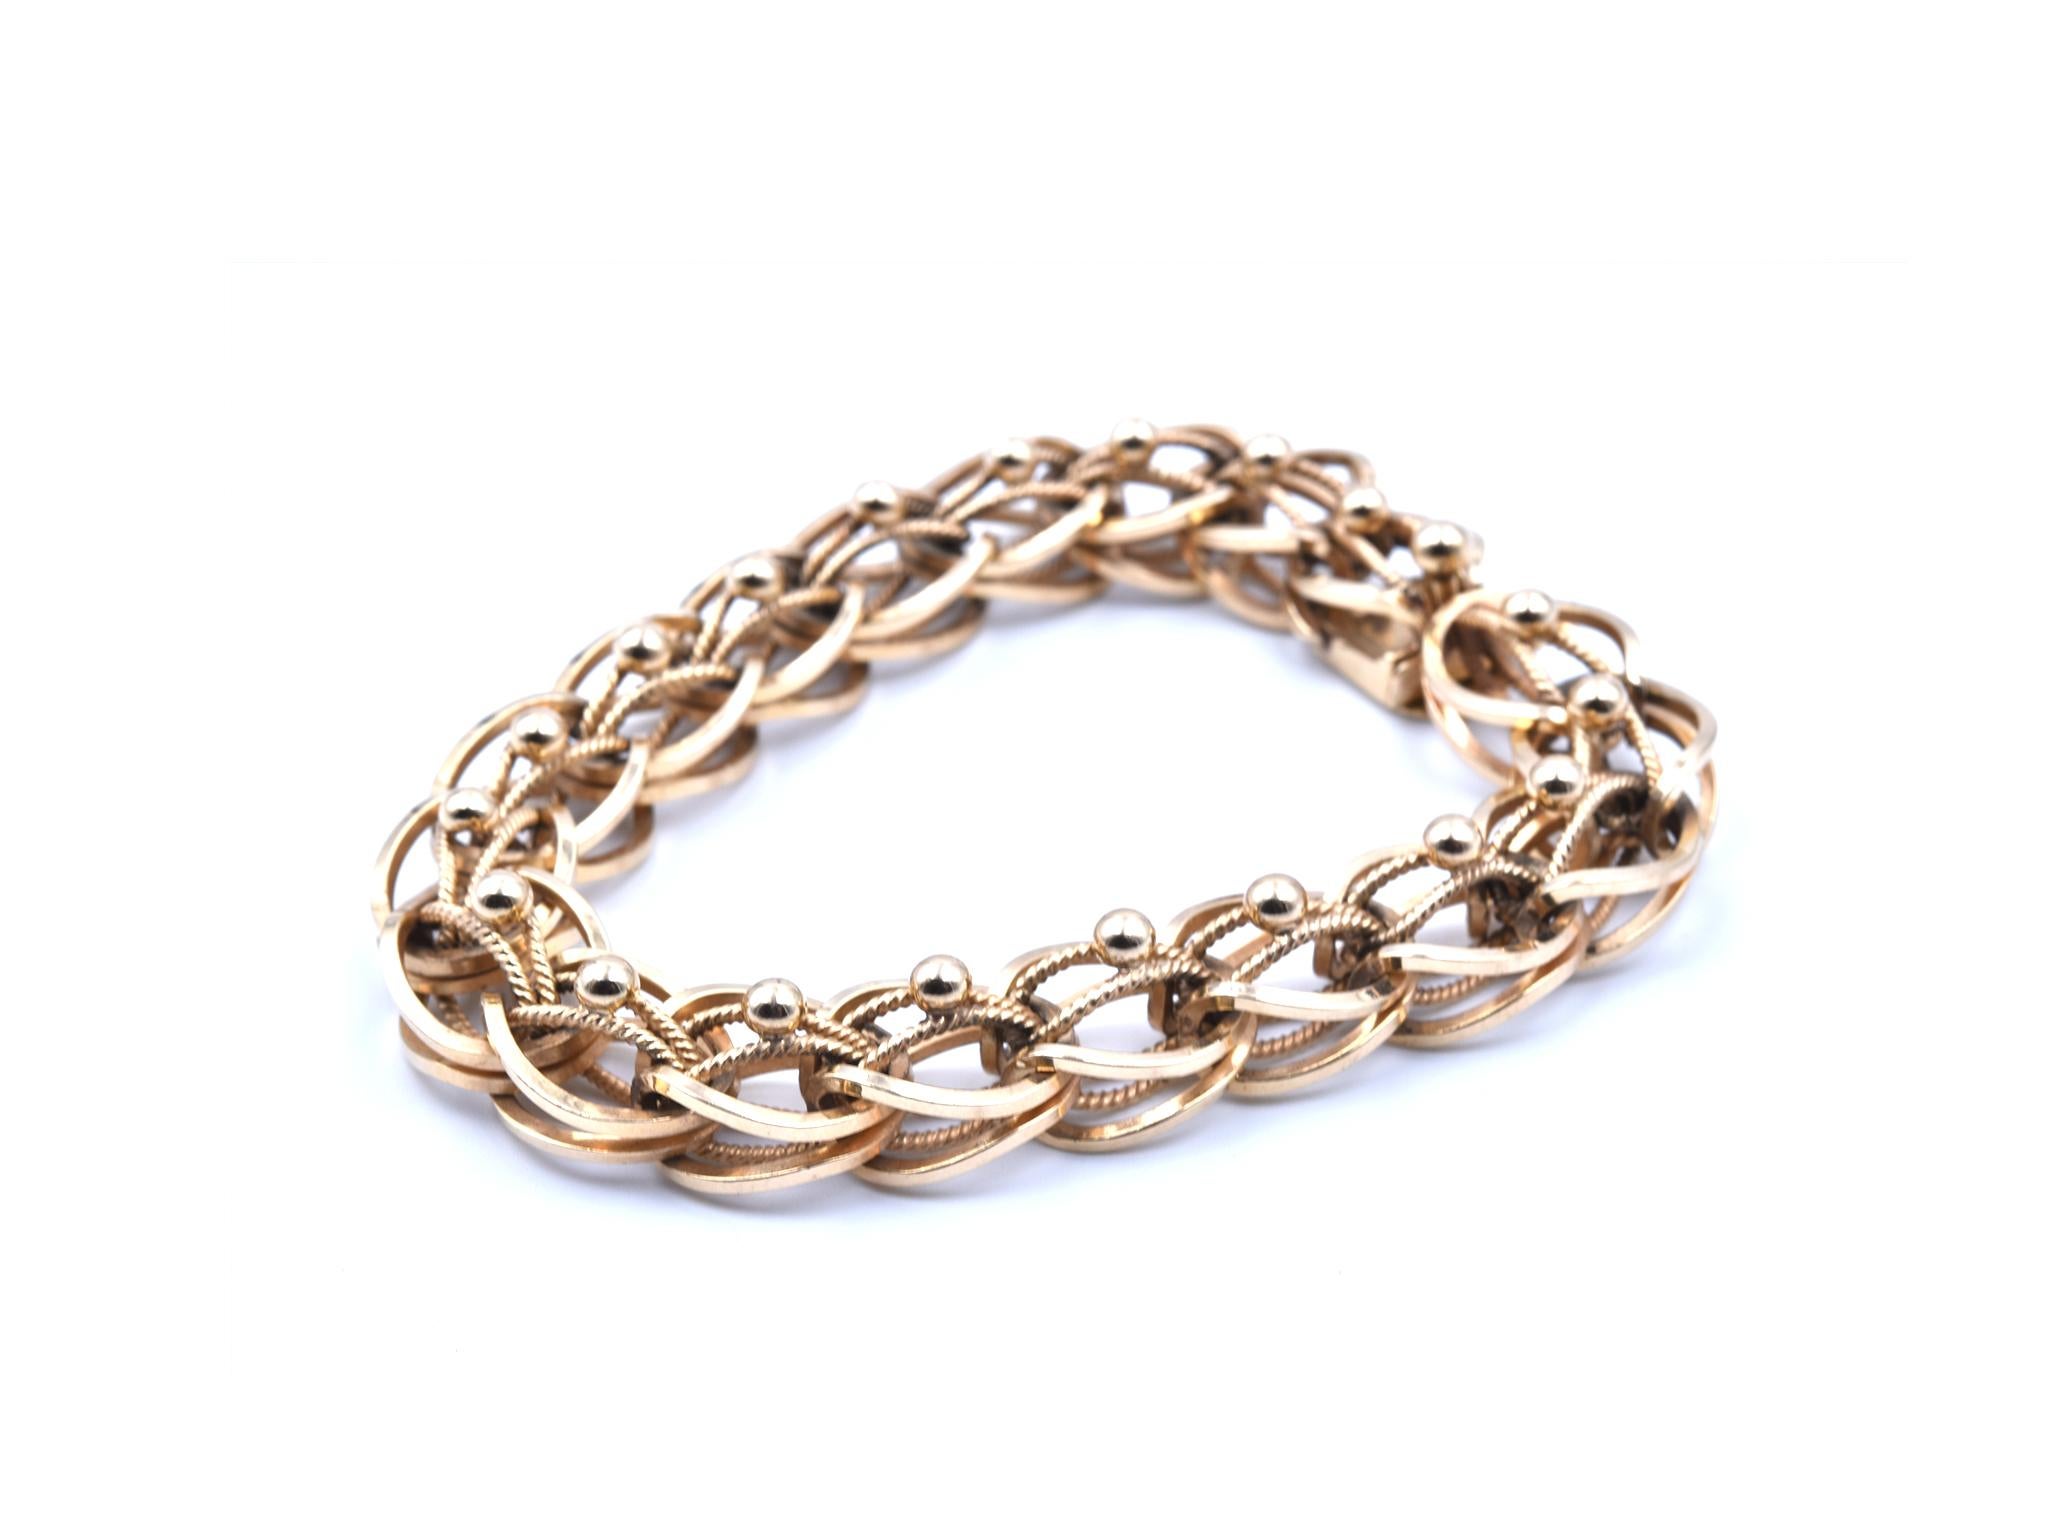 Designer: custom design
Material: 14k yellow gold
Dimensions: bracelet is 8 -inch long and 11.97mm wide 
Weight: 41.95 grams
